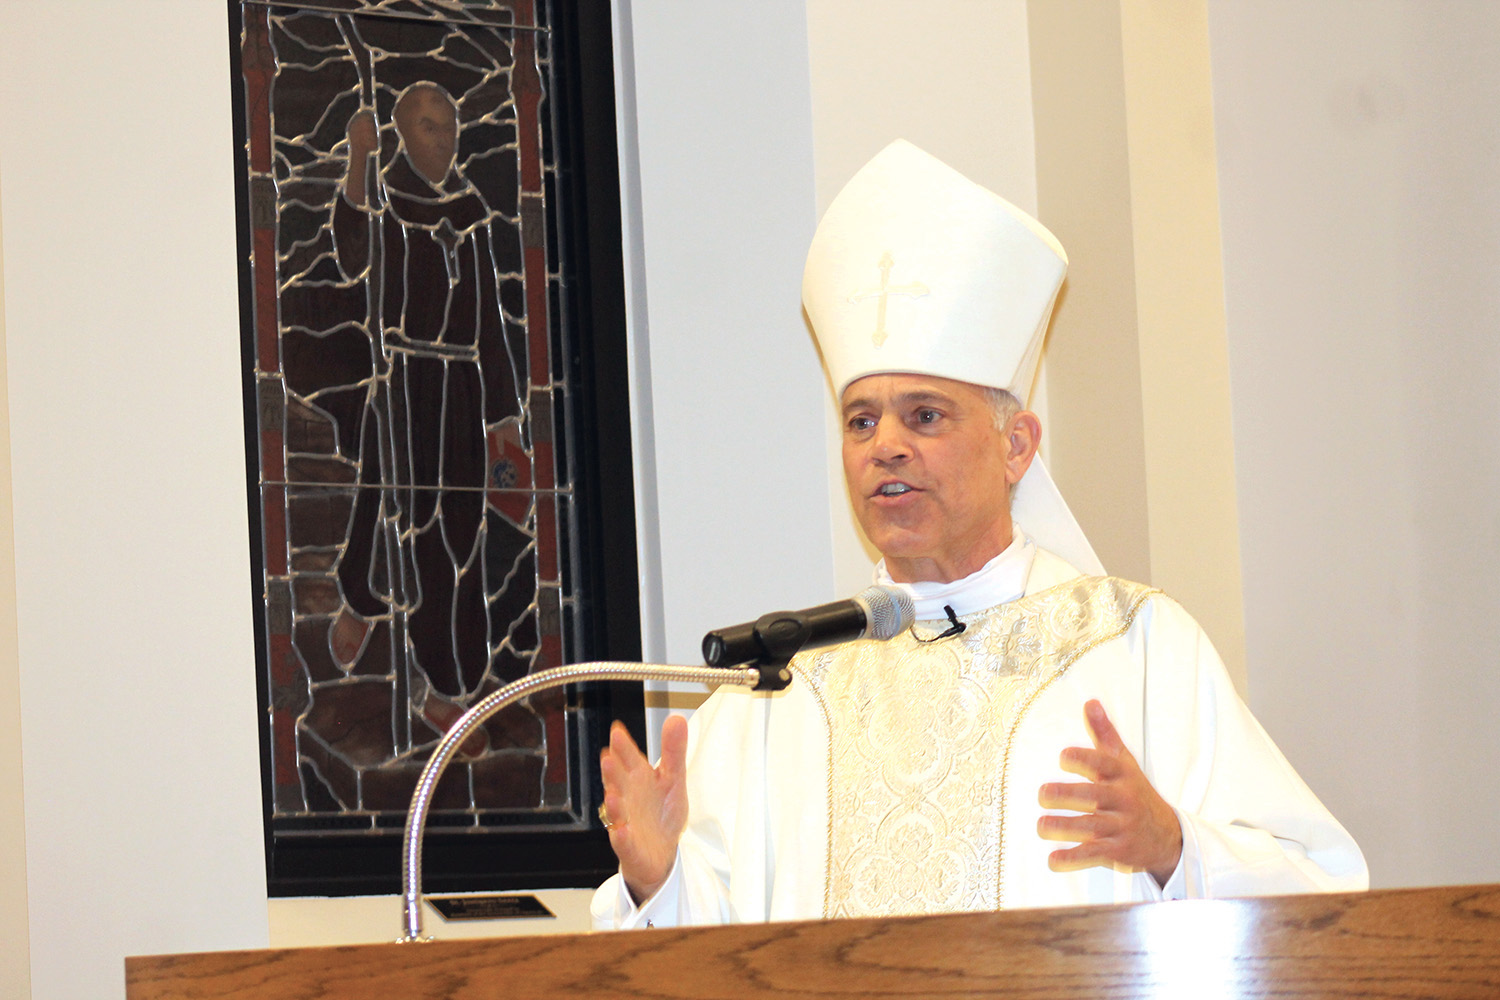 Archbishop Salvatore Cordileone of San Francsico preached the homily at the annual White Mass held at the Phoenix Diocesan Pastoral Center Oct. 15. (Tony Gutiérrez/CATHOLIC SUN)